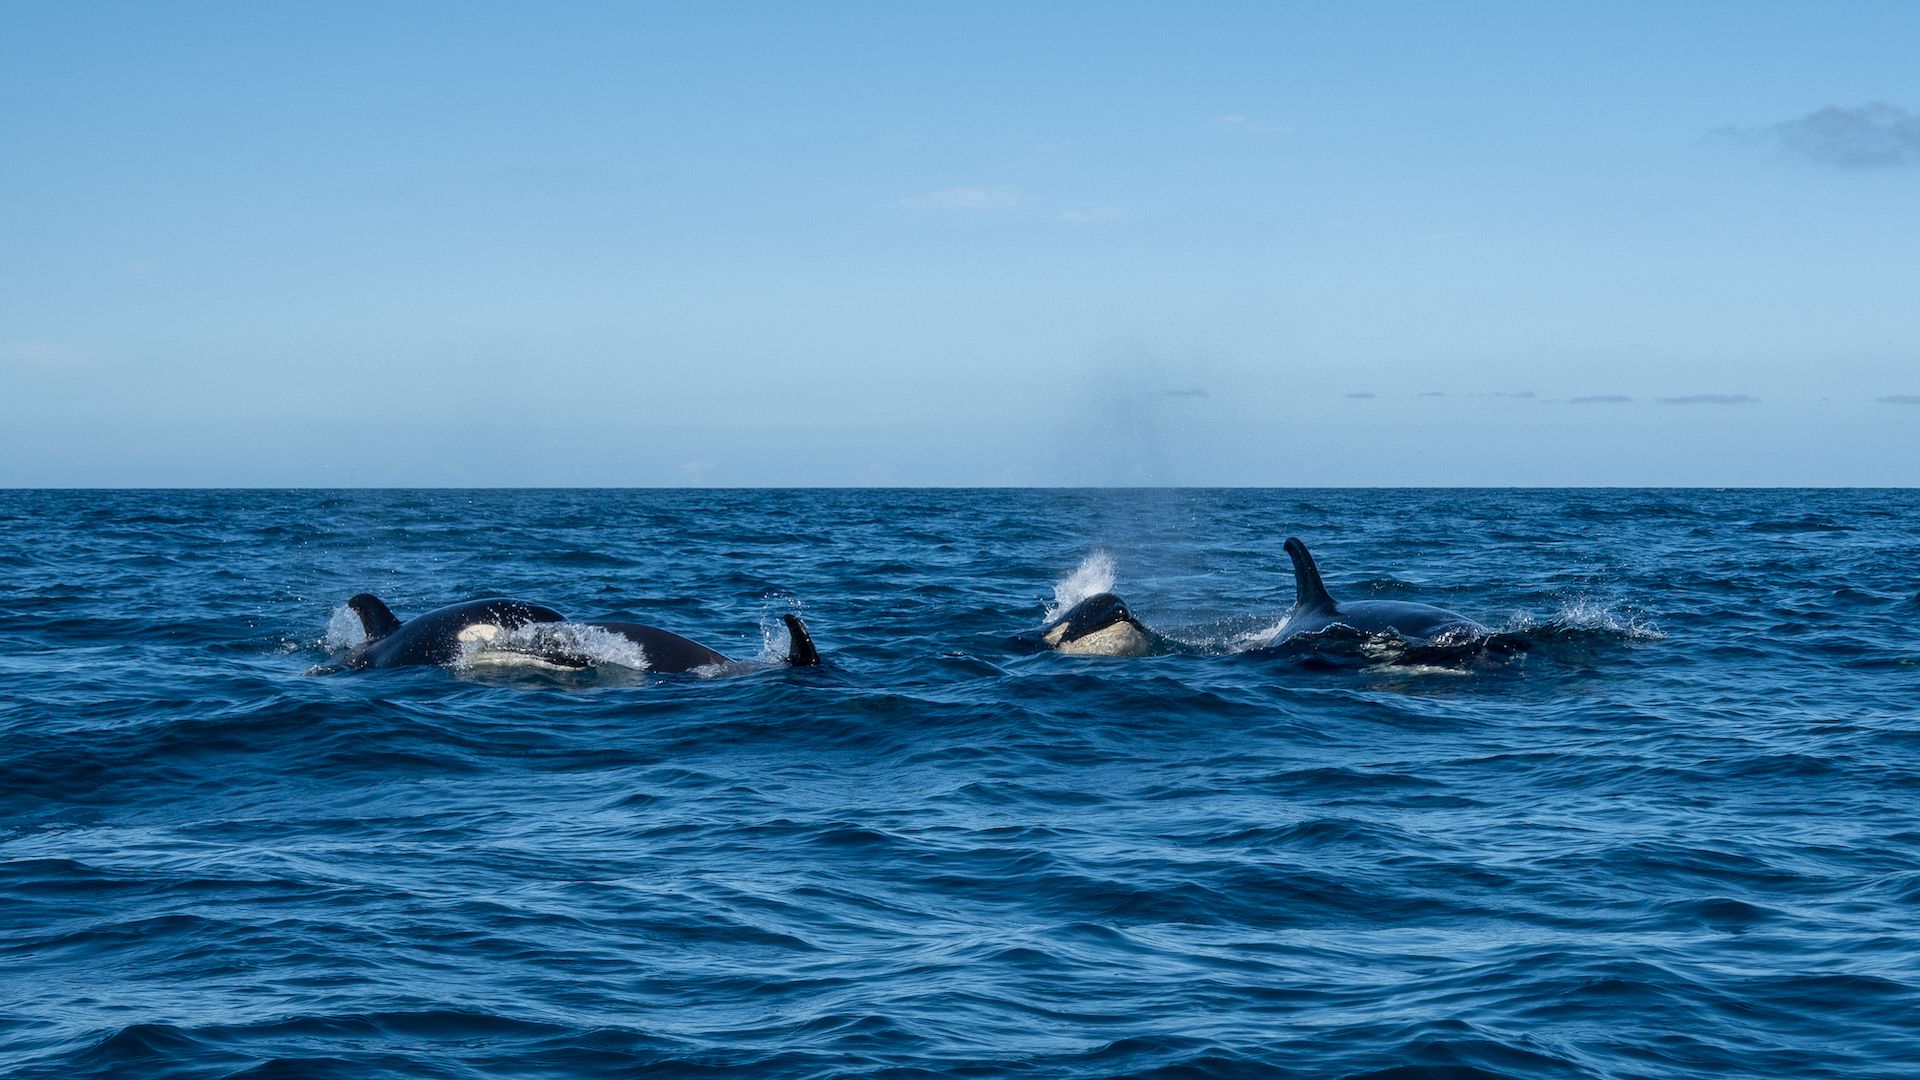 A pod of killer whales showing off